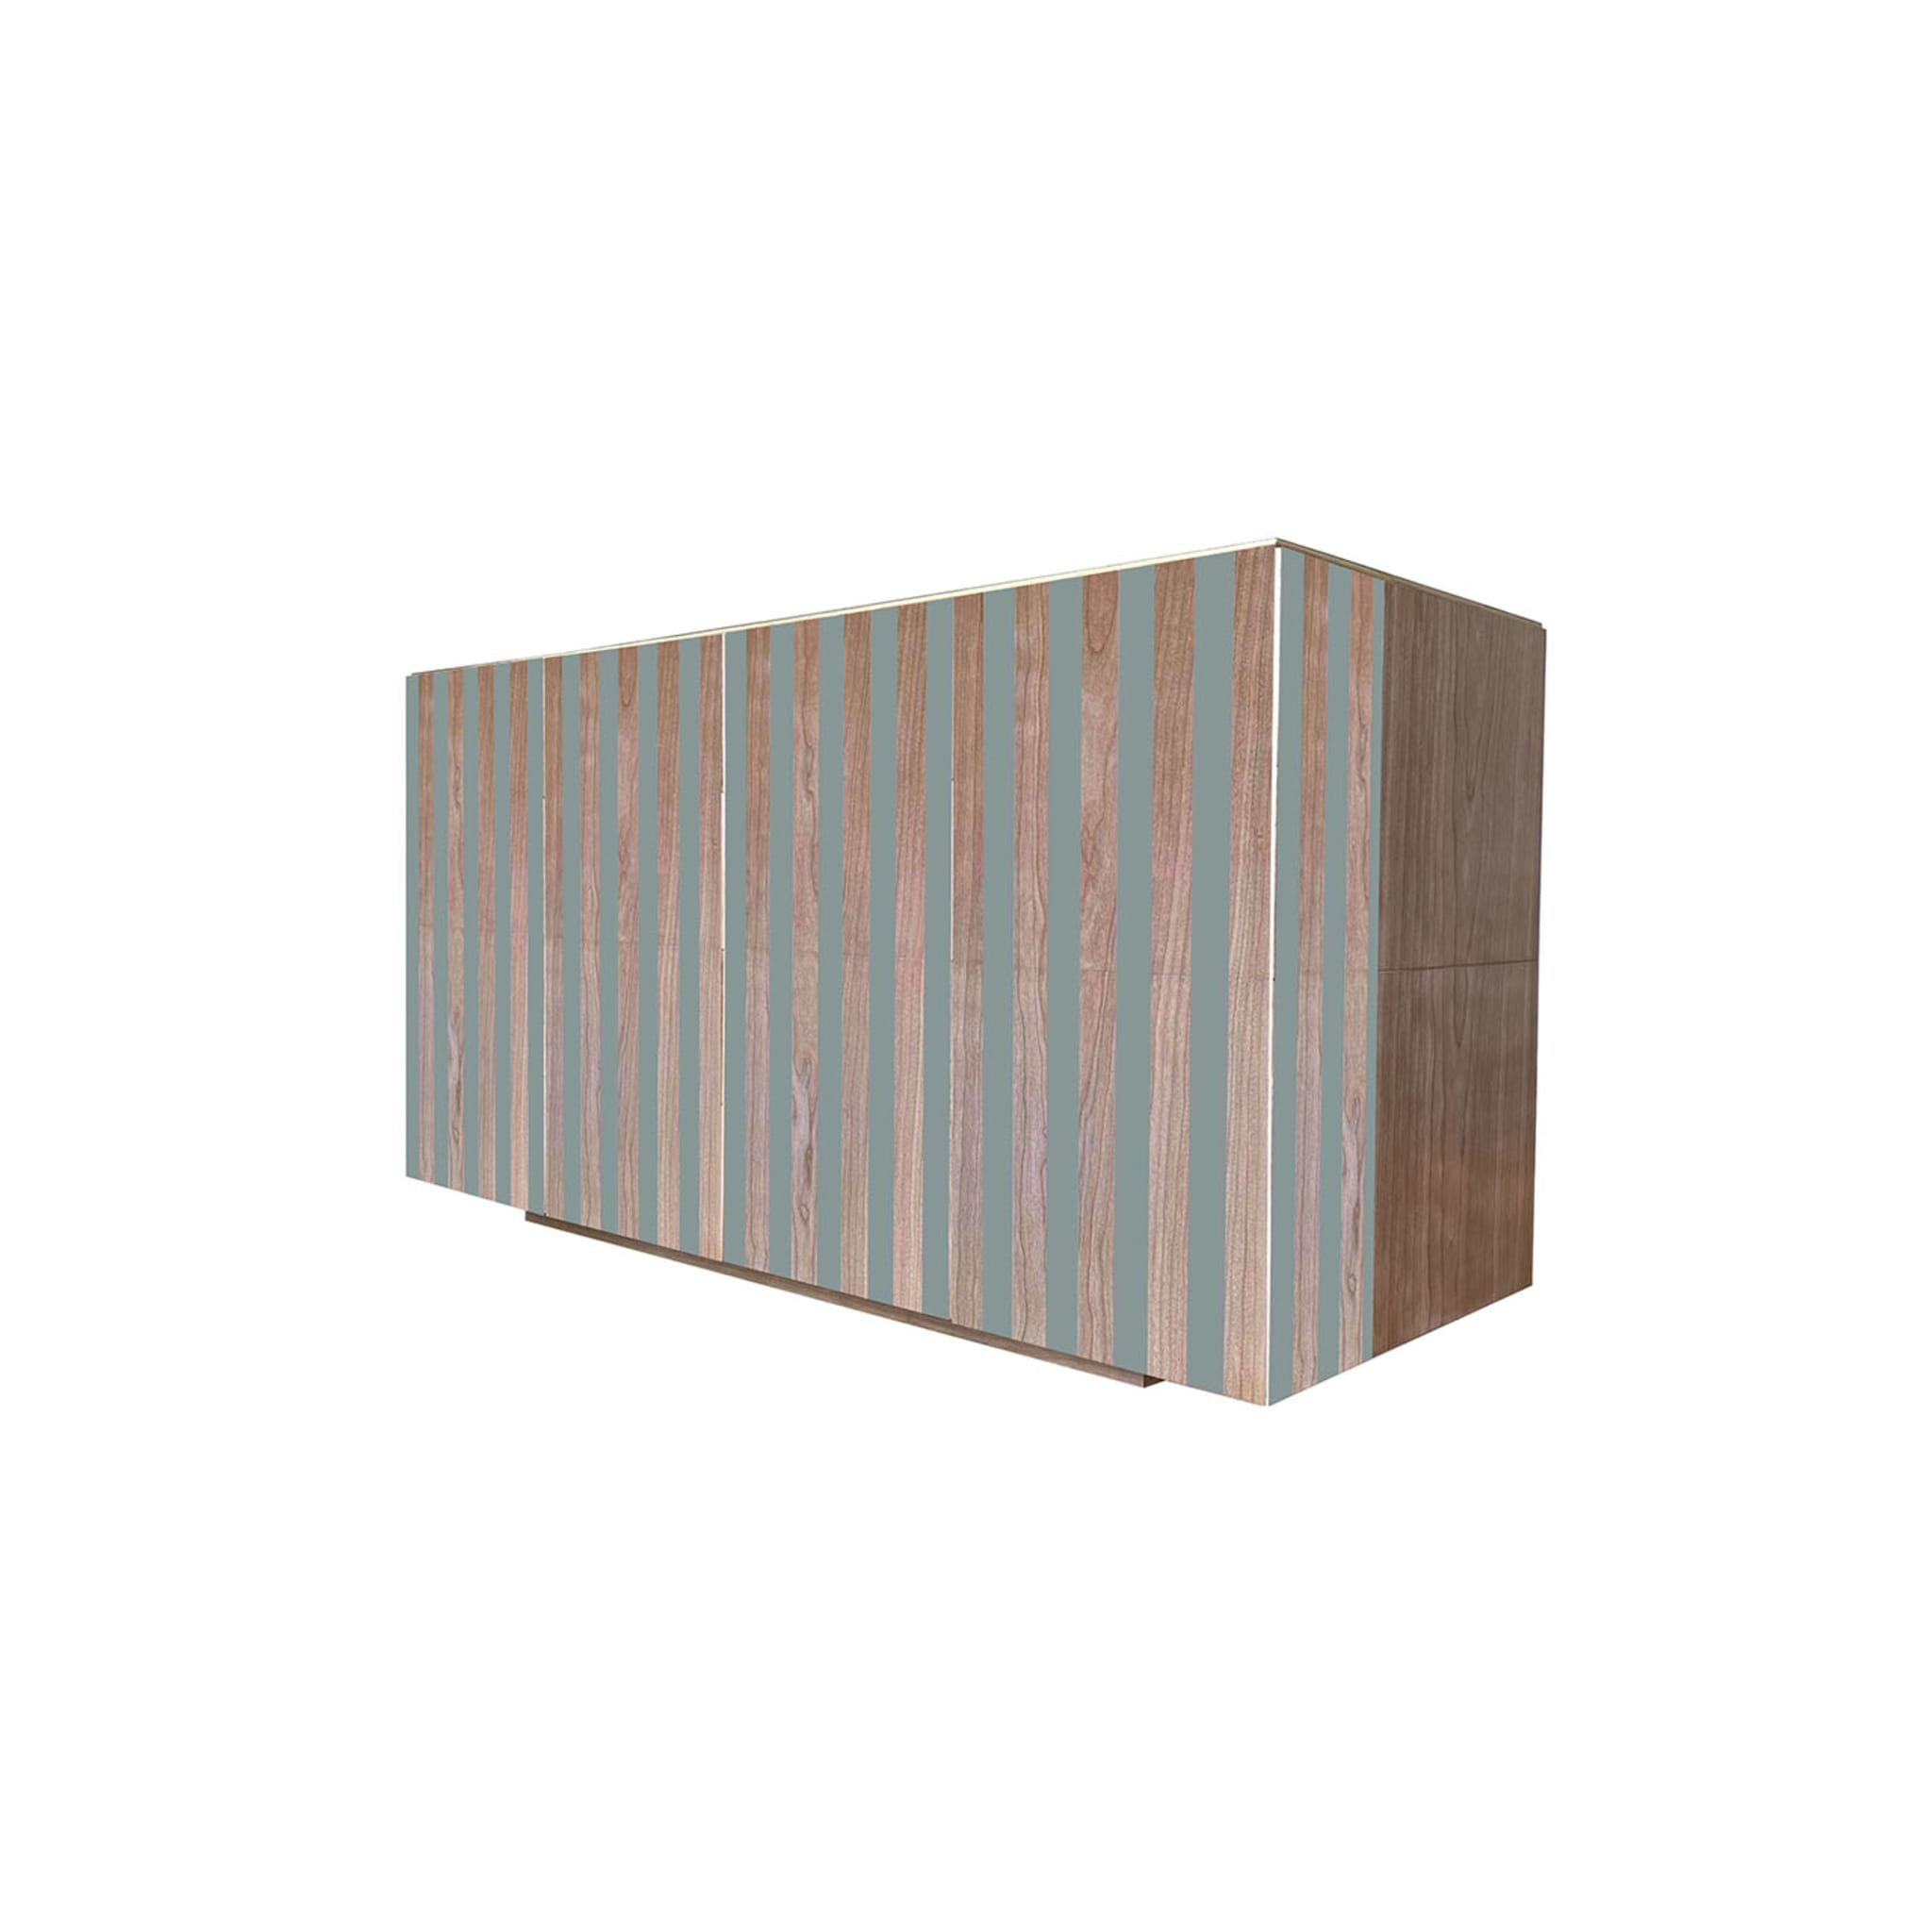 Md3 4-Door Striped Sideboard by Meccani Studio - Alternative view 2